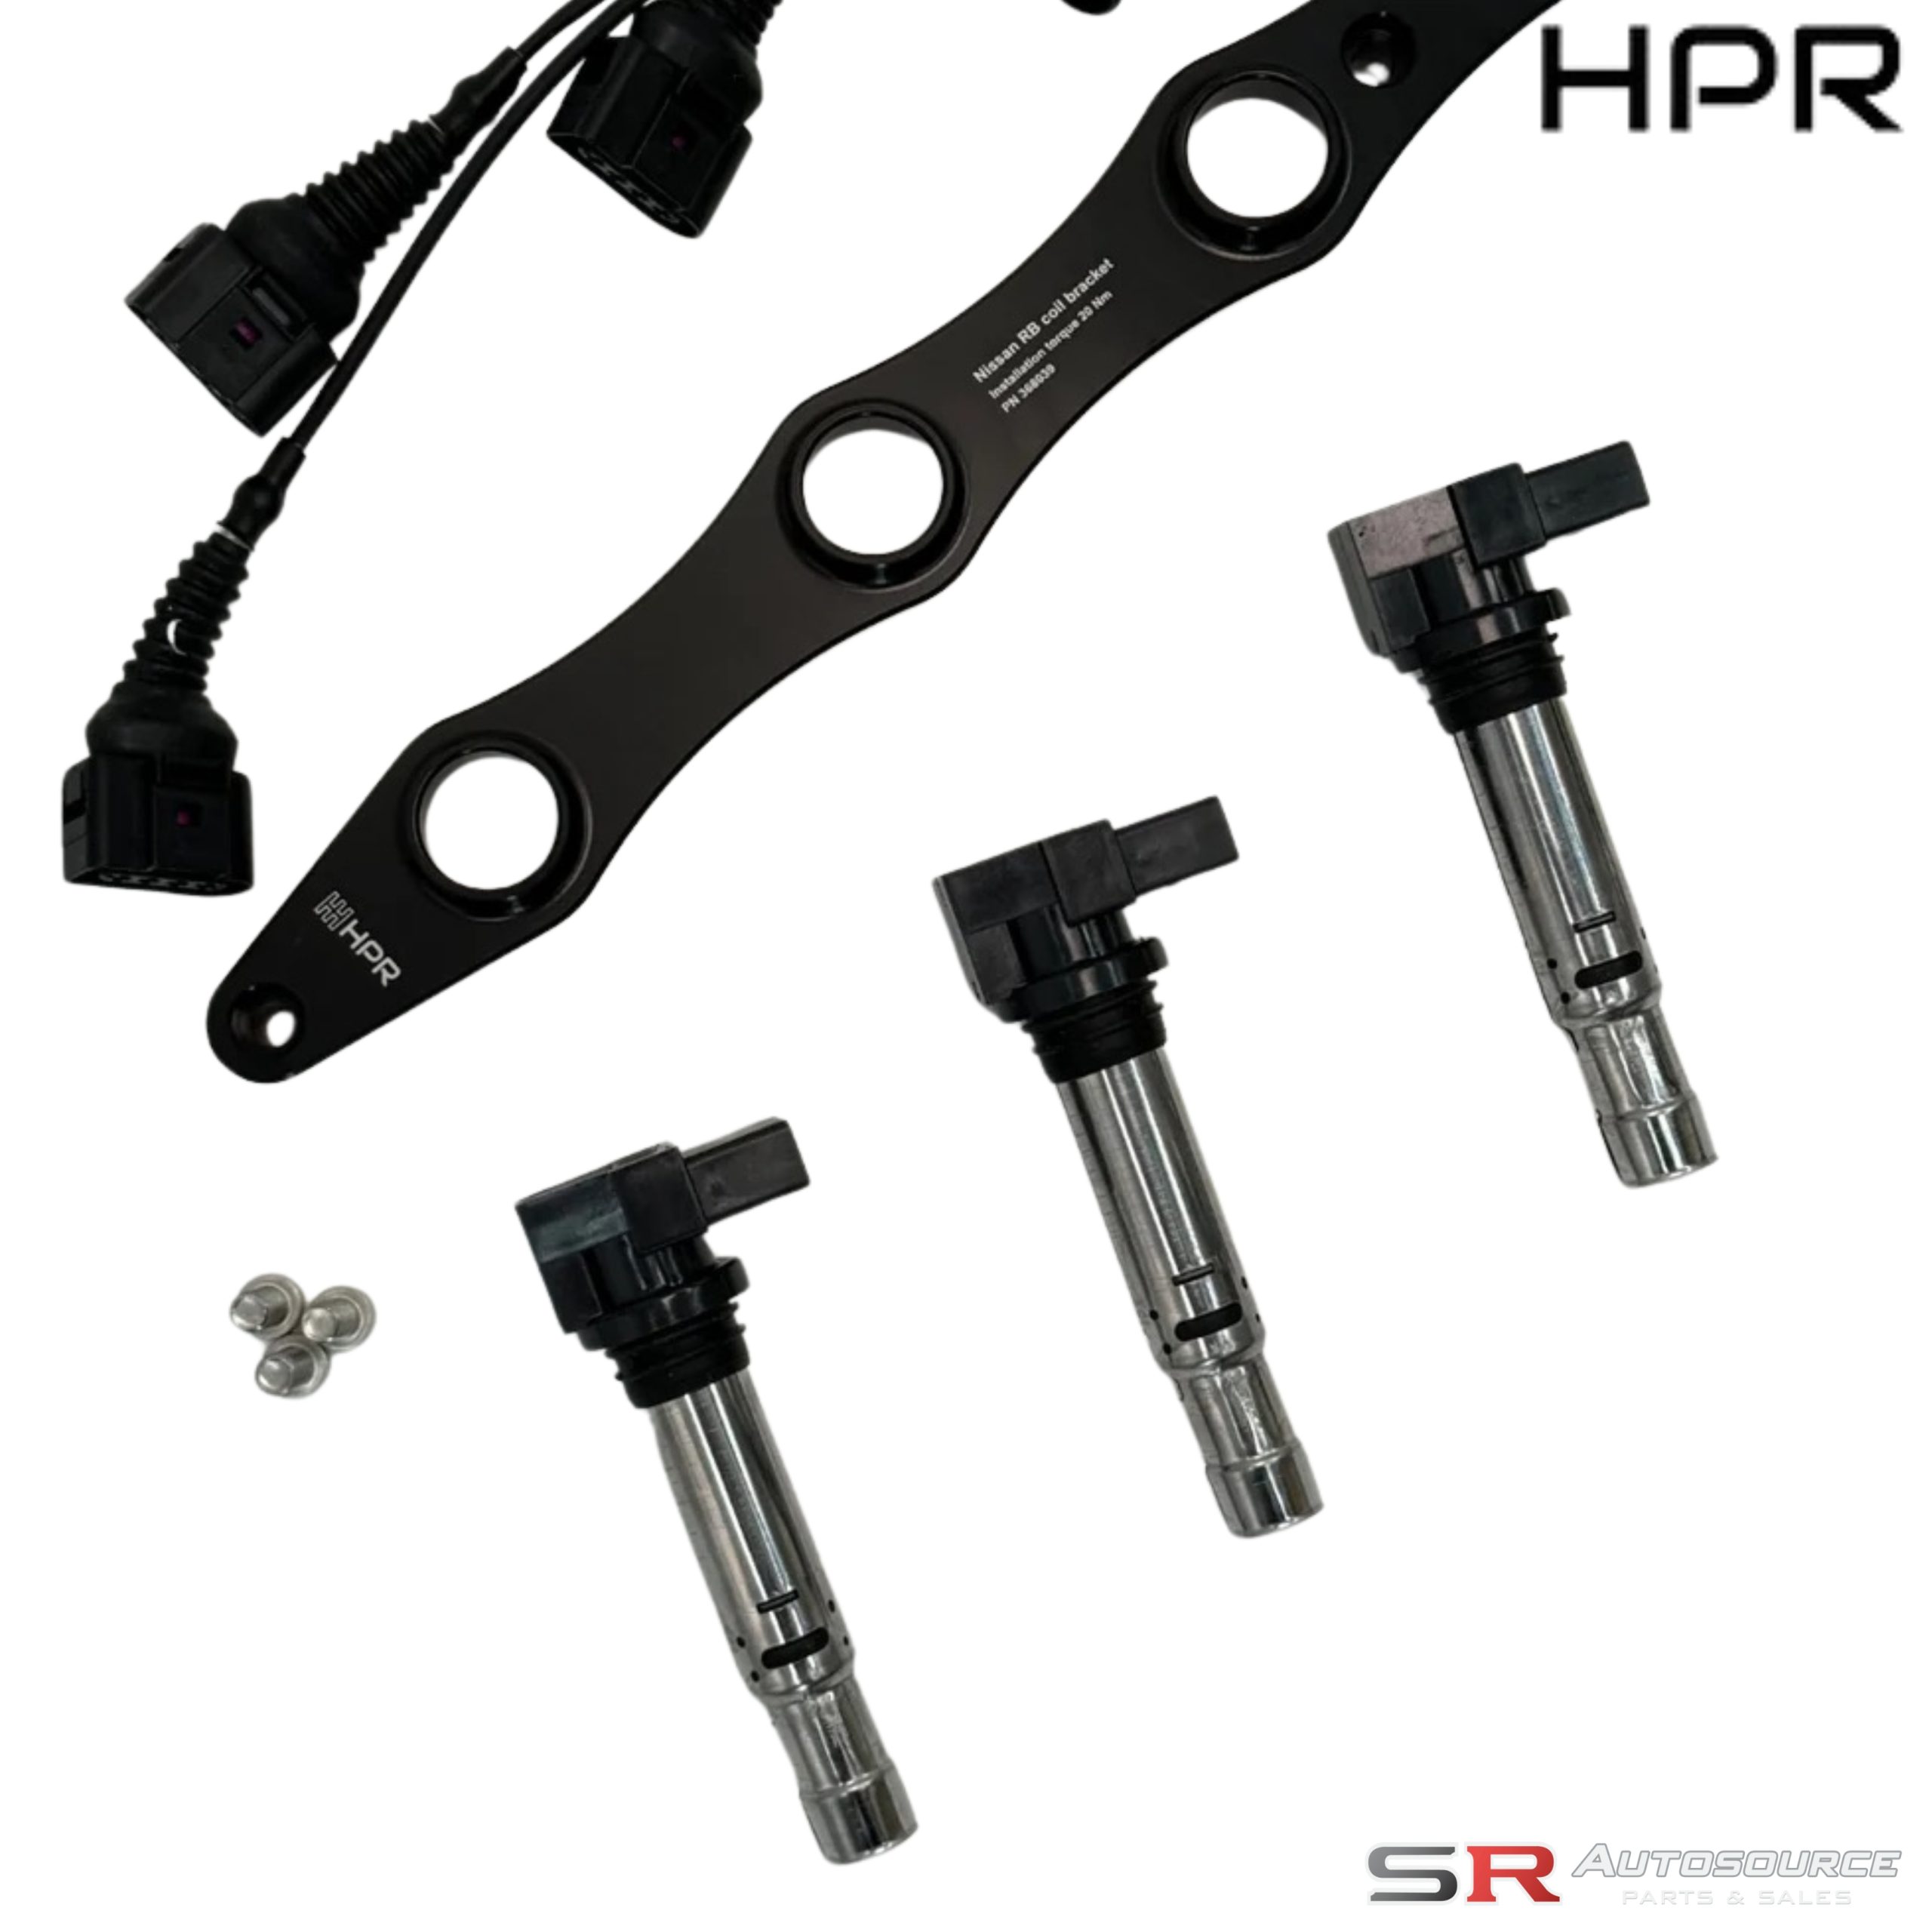 HPR Tuning Nissan RB Coil Pack Kit